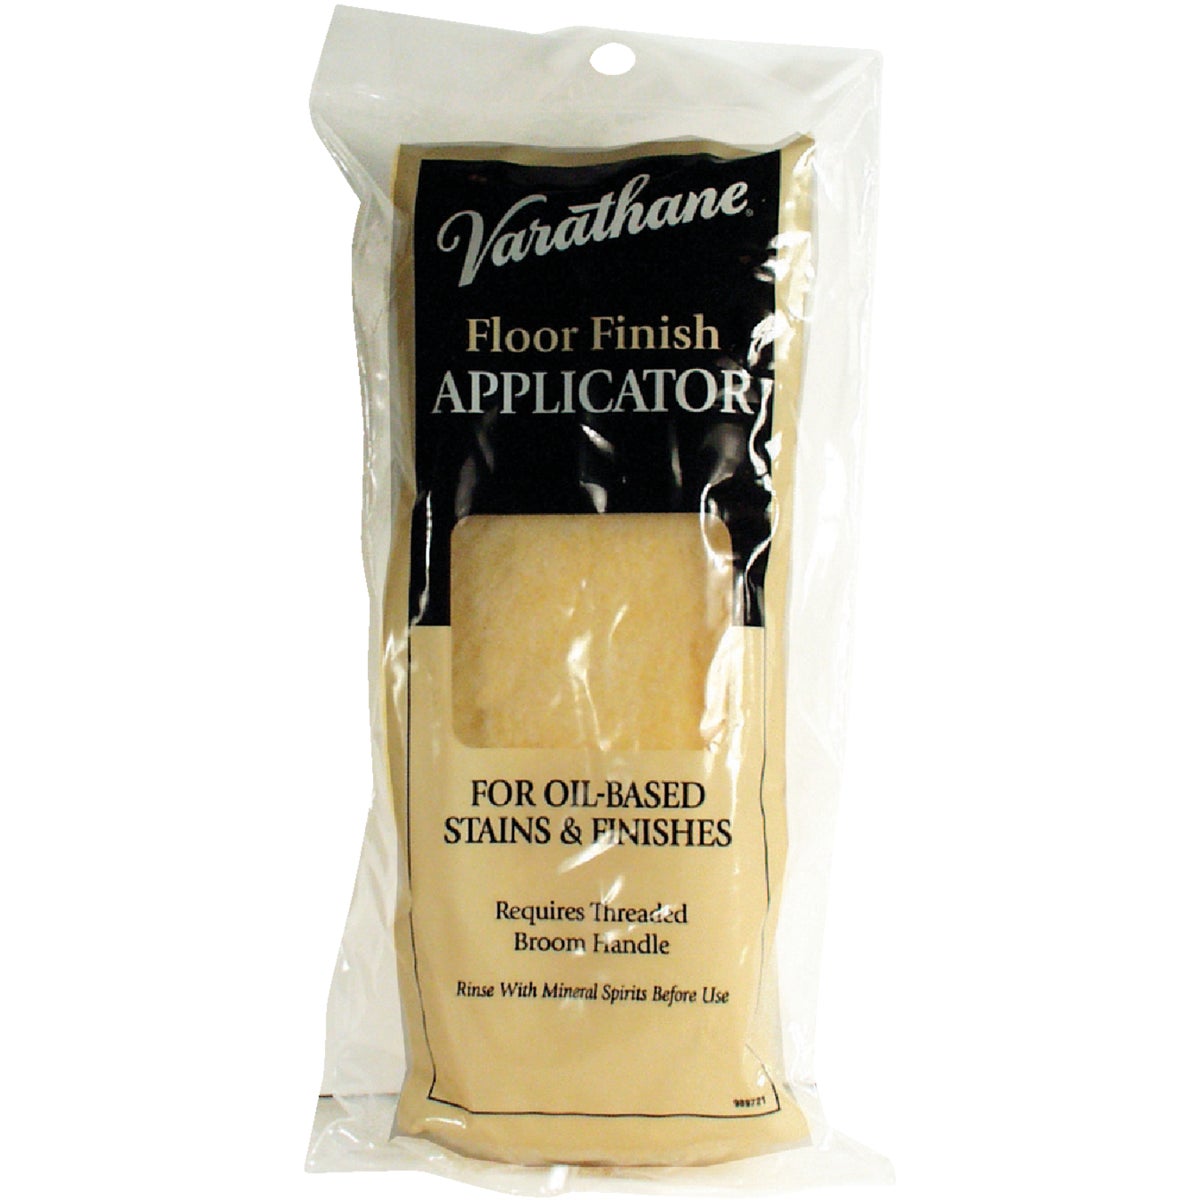 Varathane 10 In. Lambswool Applicator with Threaded Hole for Oil-Based Finishes